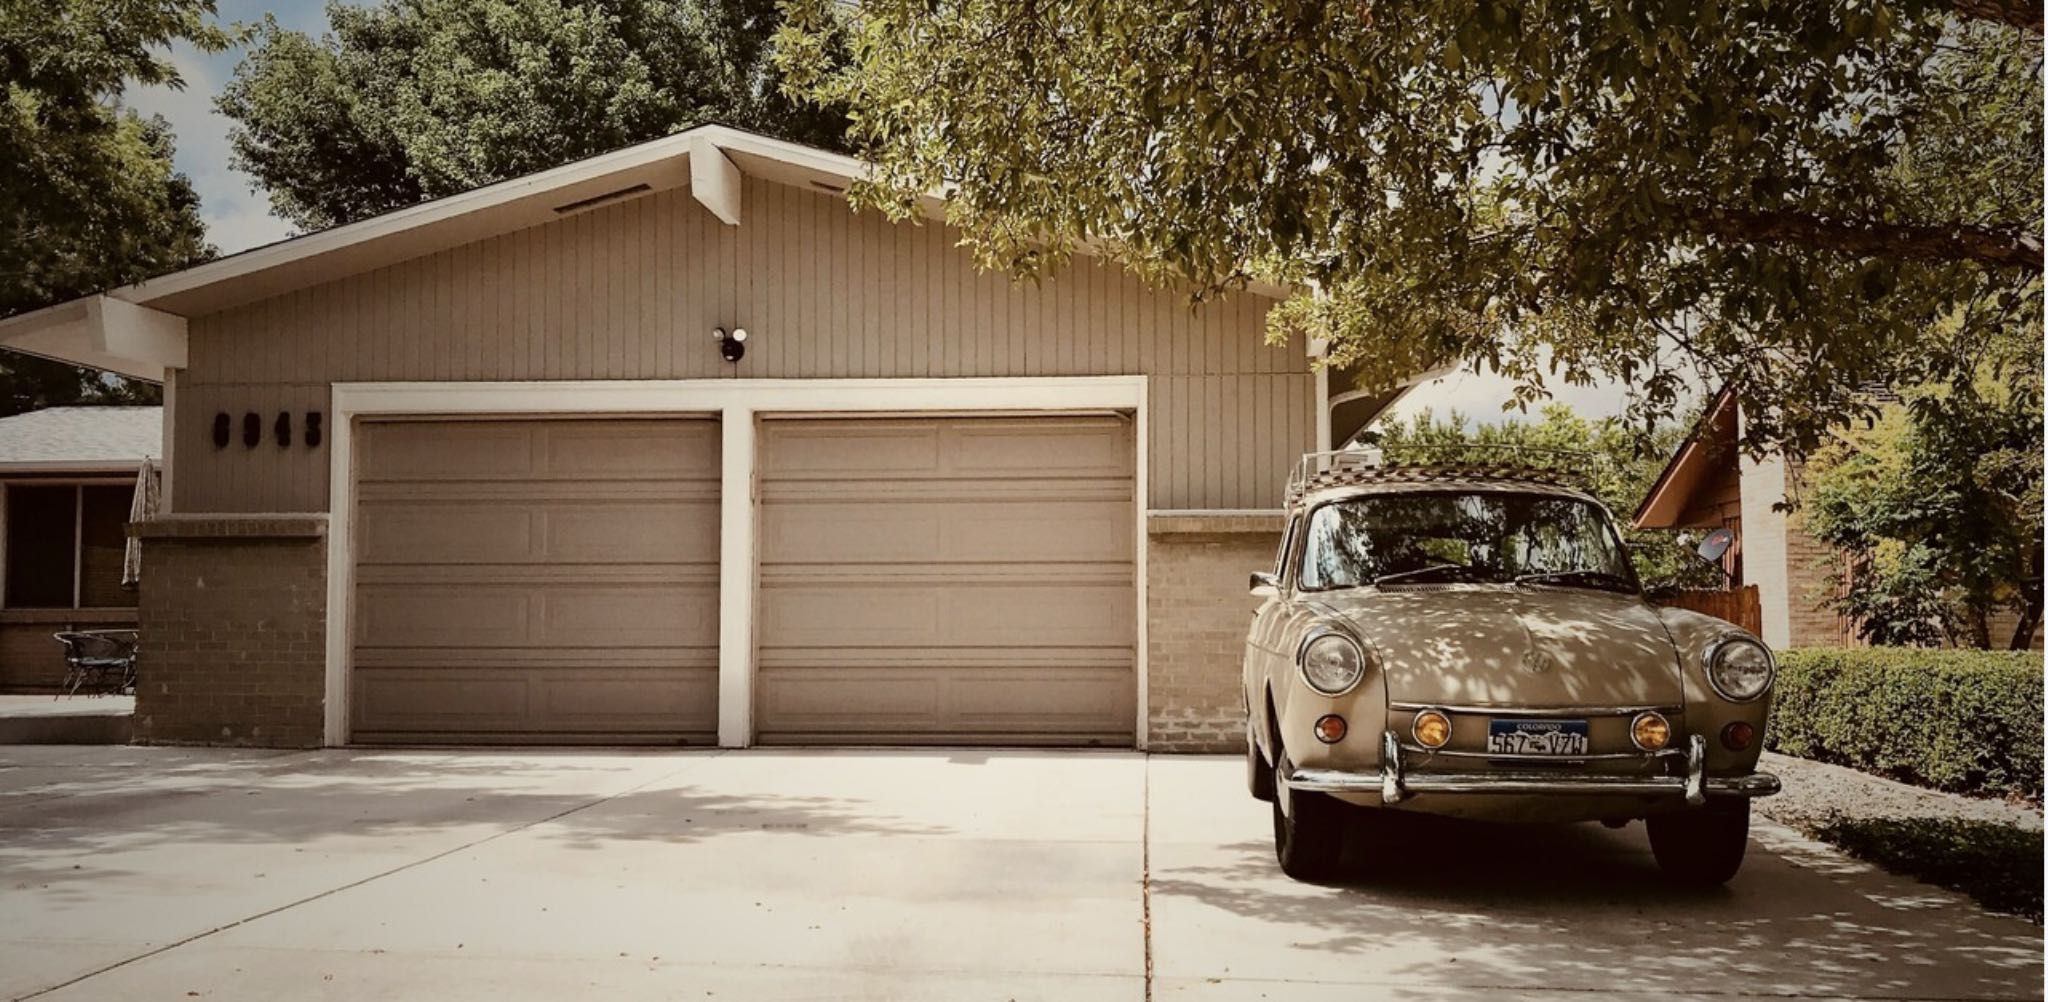 Picture of a driveway featuring a retro car to represent the sub-title replace your garage door